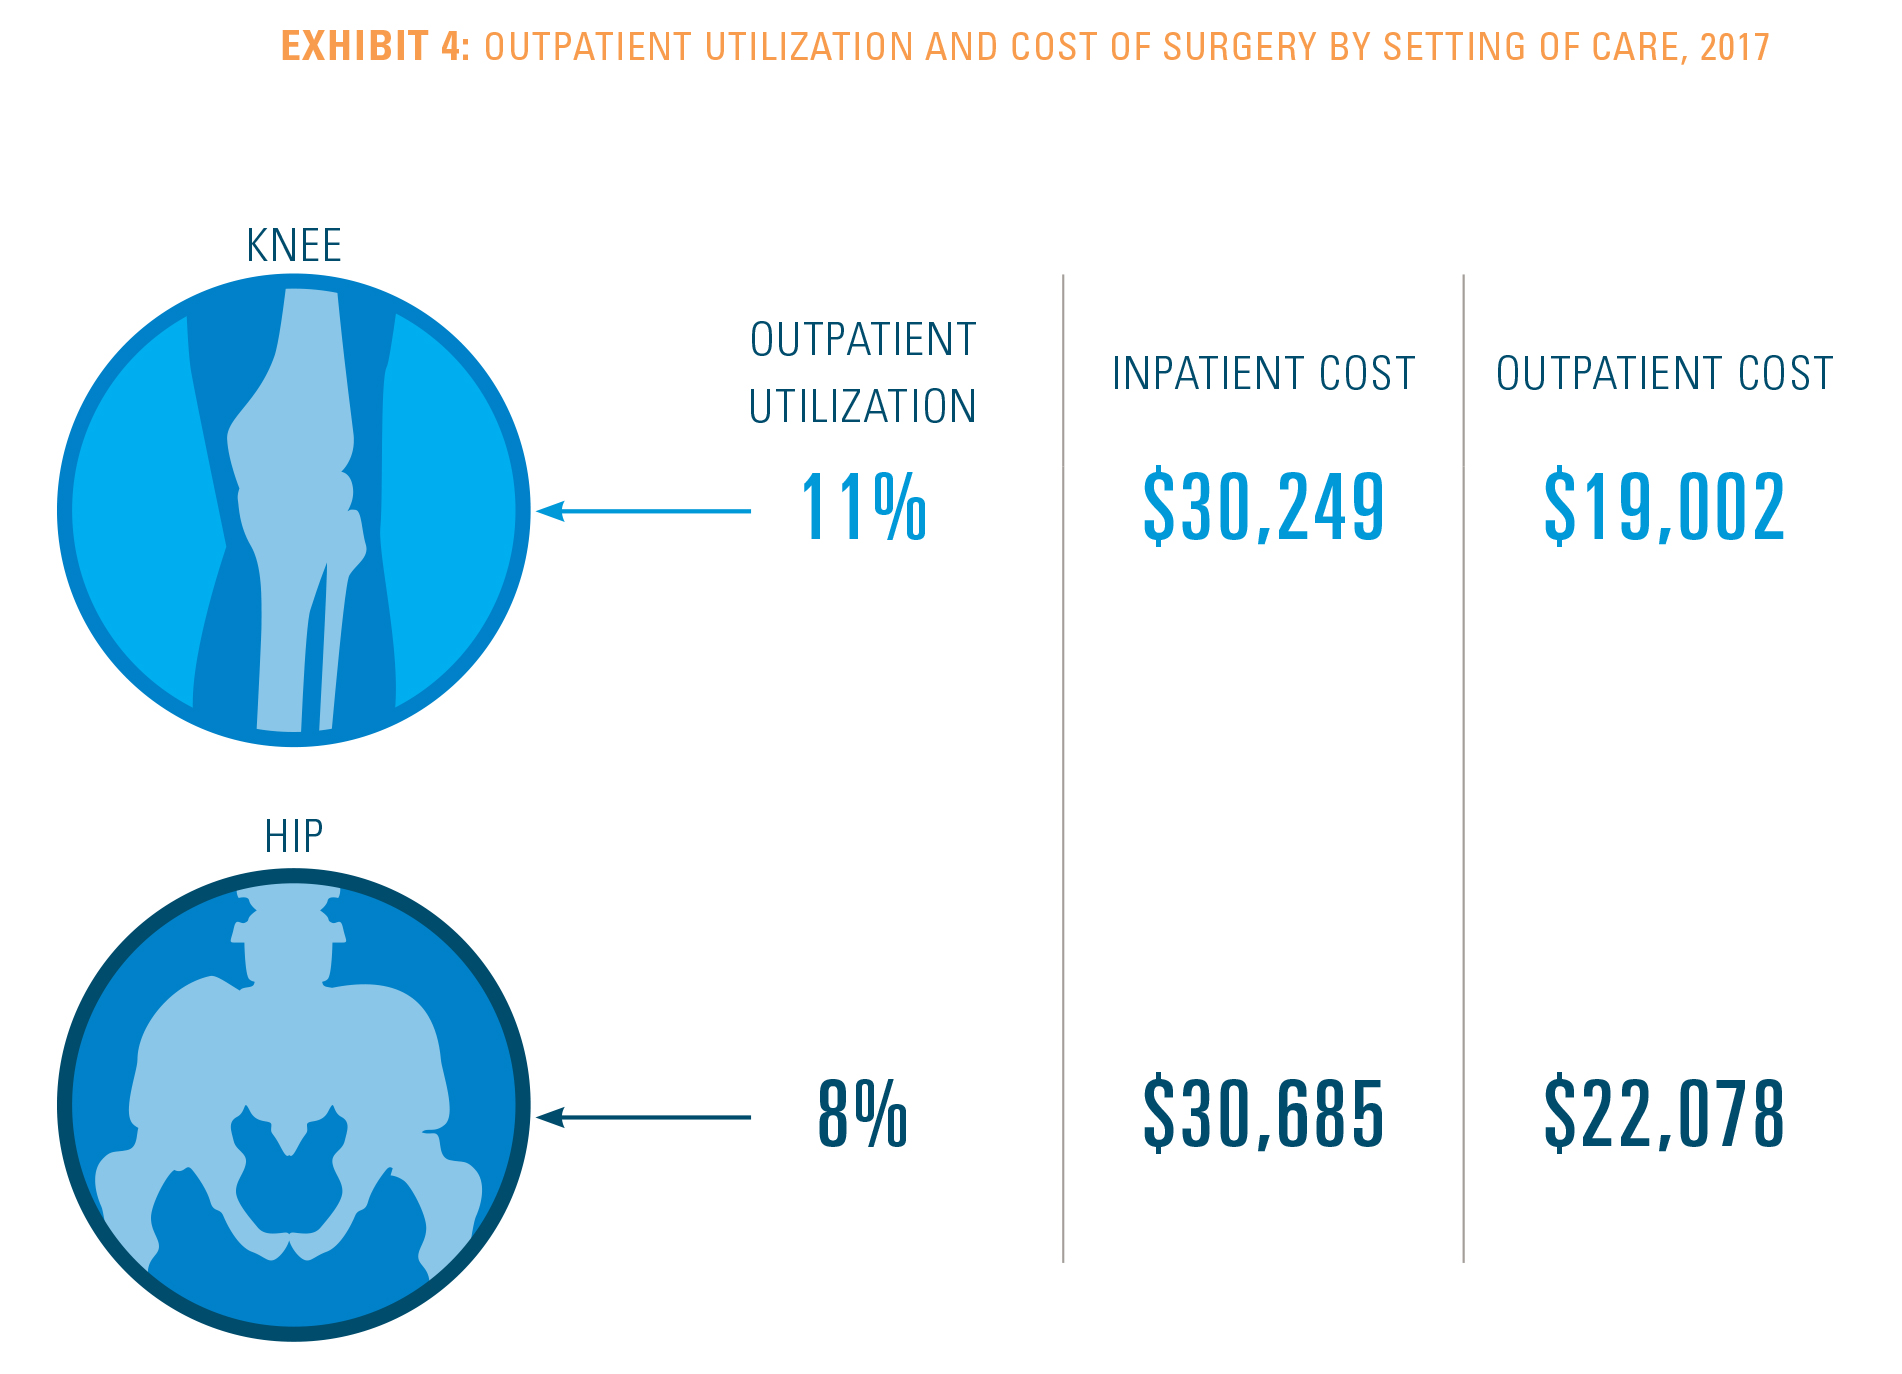 EXHIBIT 4: OUTPATIENT UTILIZATION AND COST OF SURGERY BY SETTING OF CARE, 2017